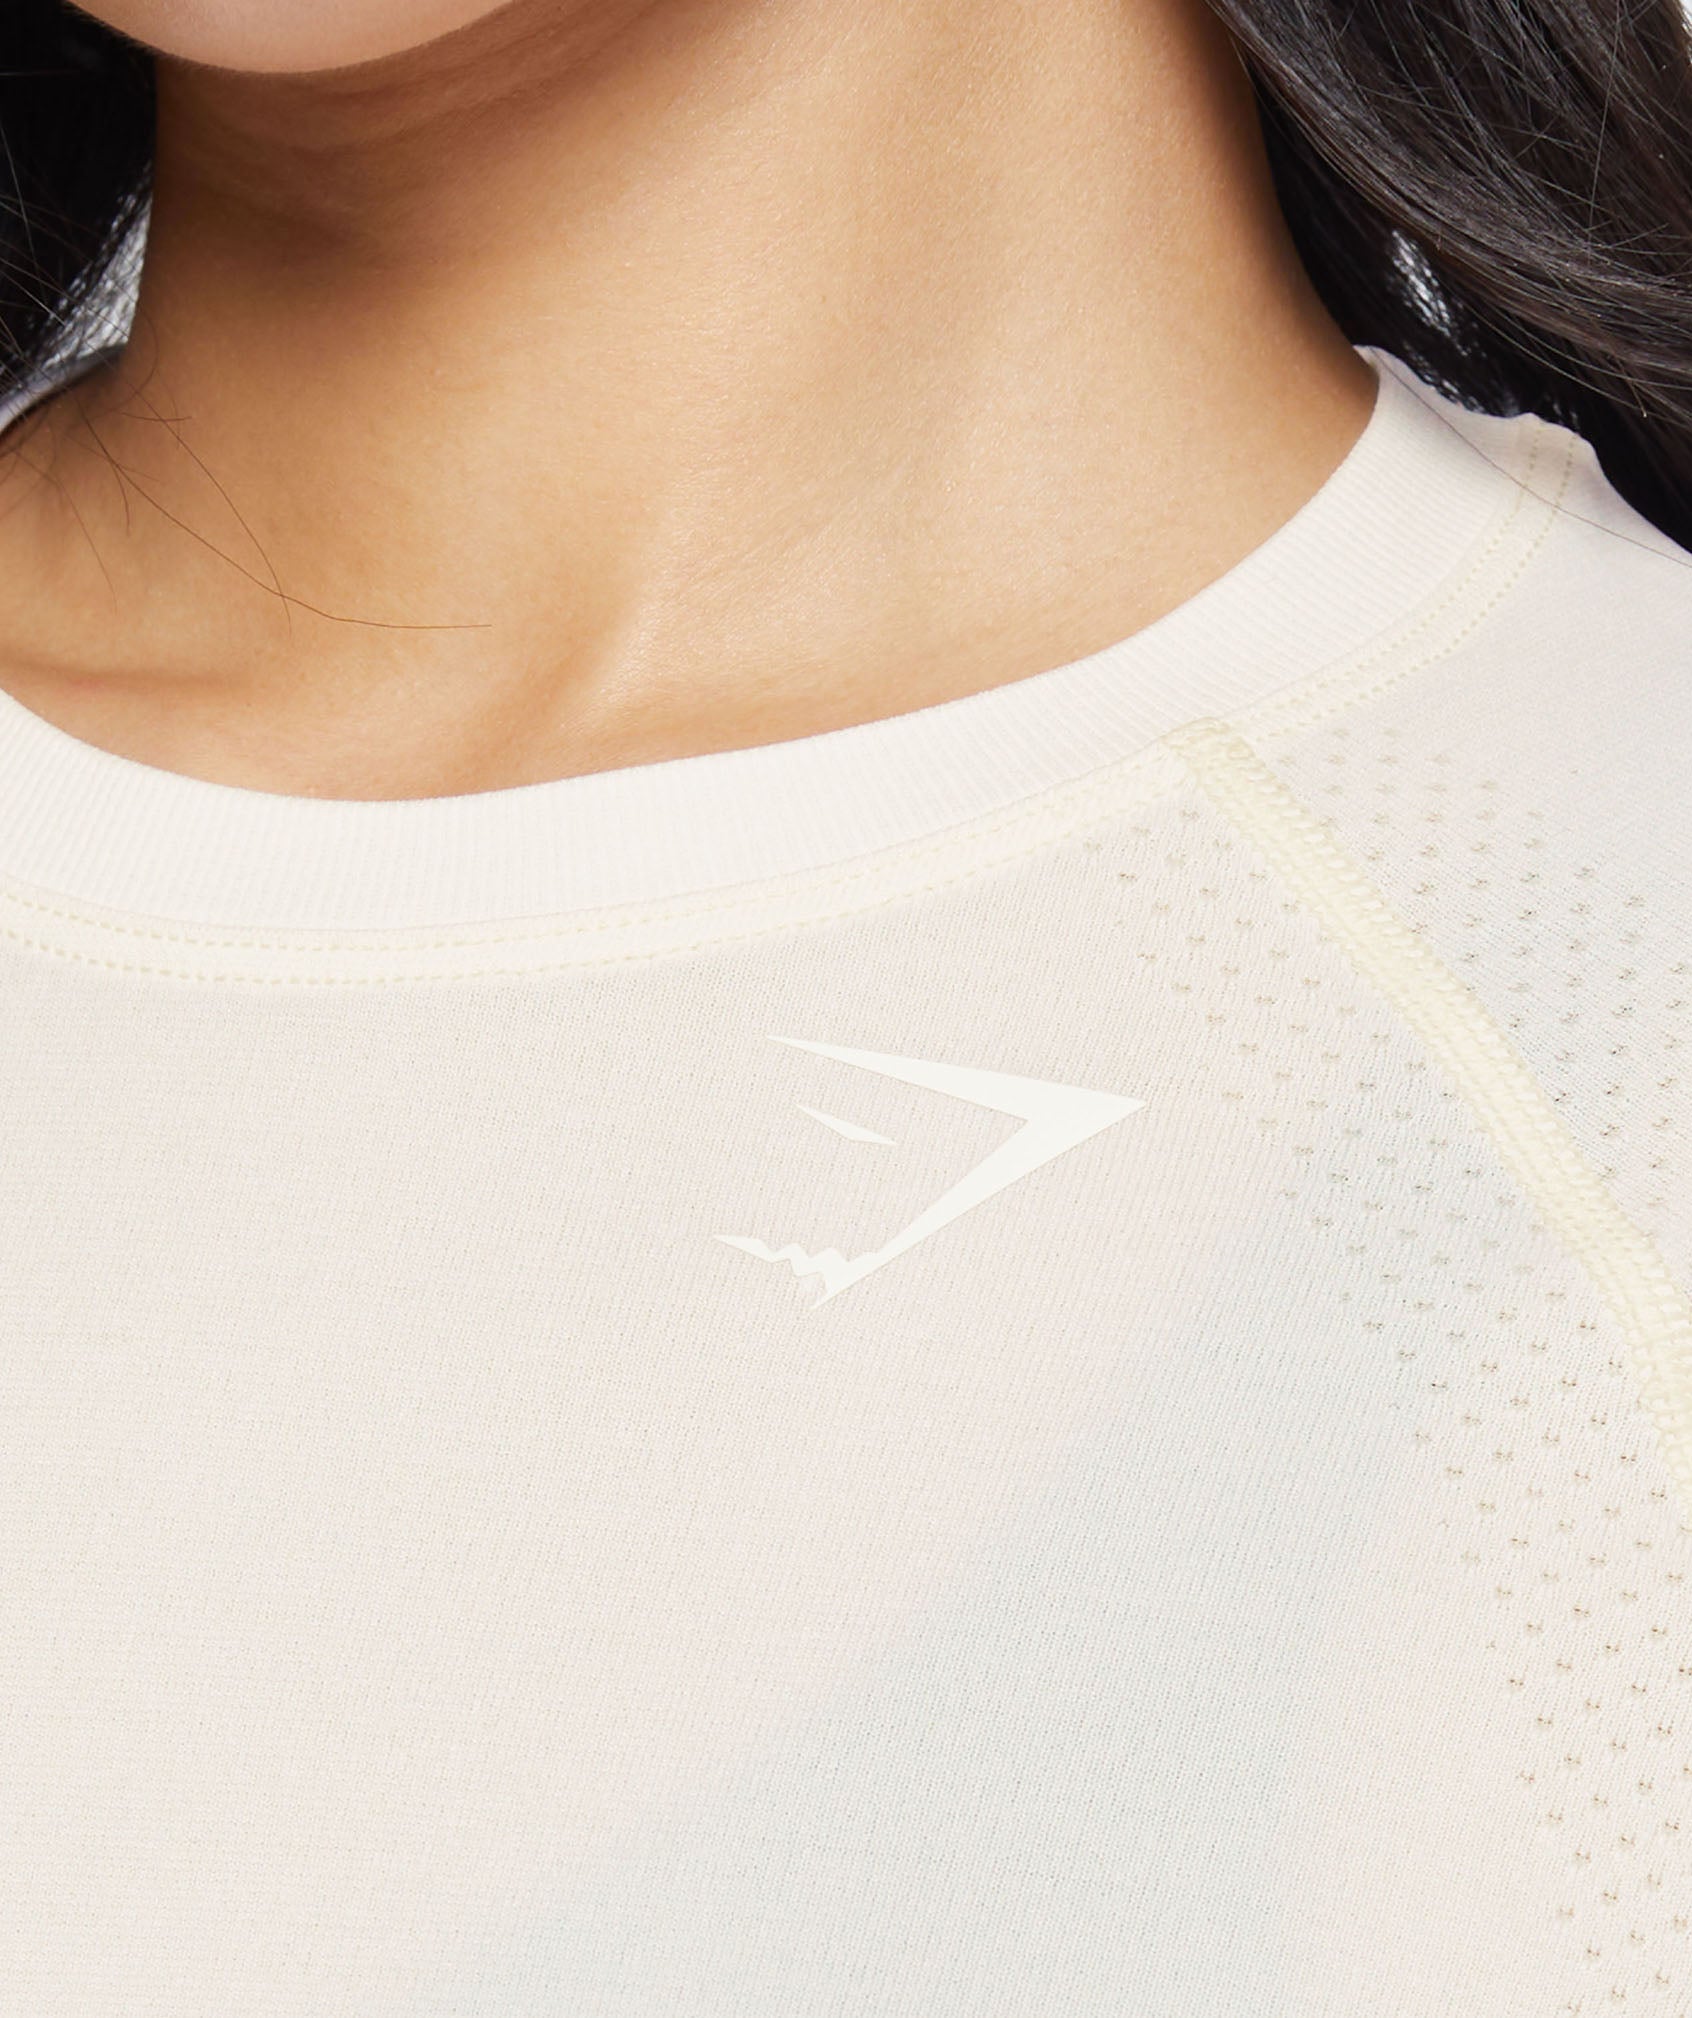 Vital Seamless 2.0 Light T-Shirt in Coconut White Marl - view 5